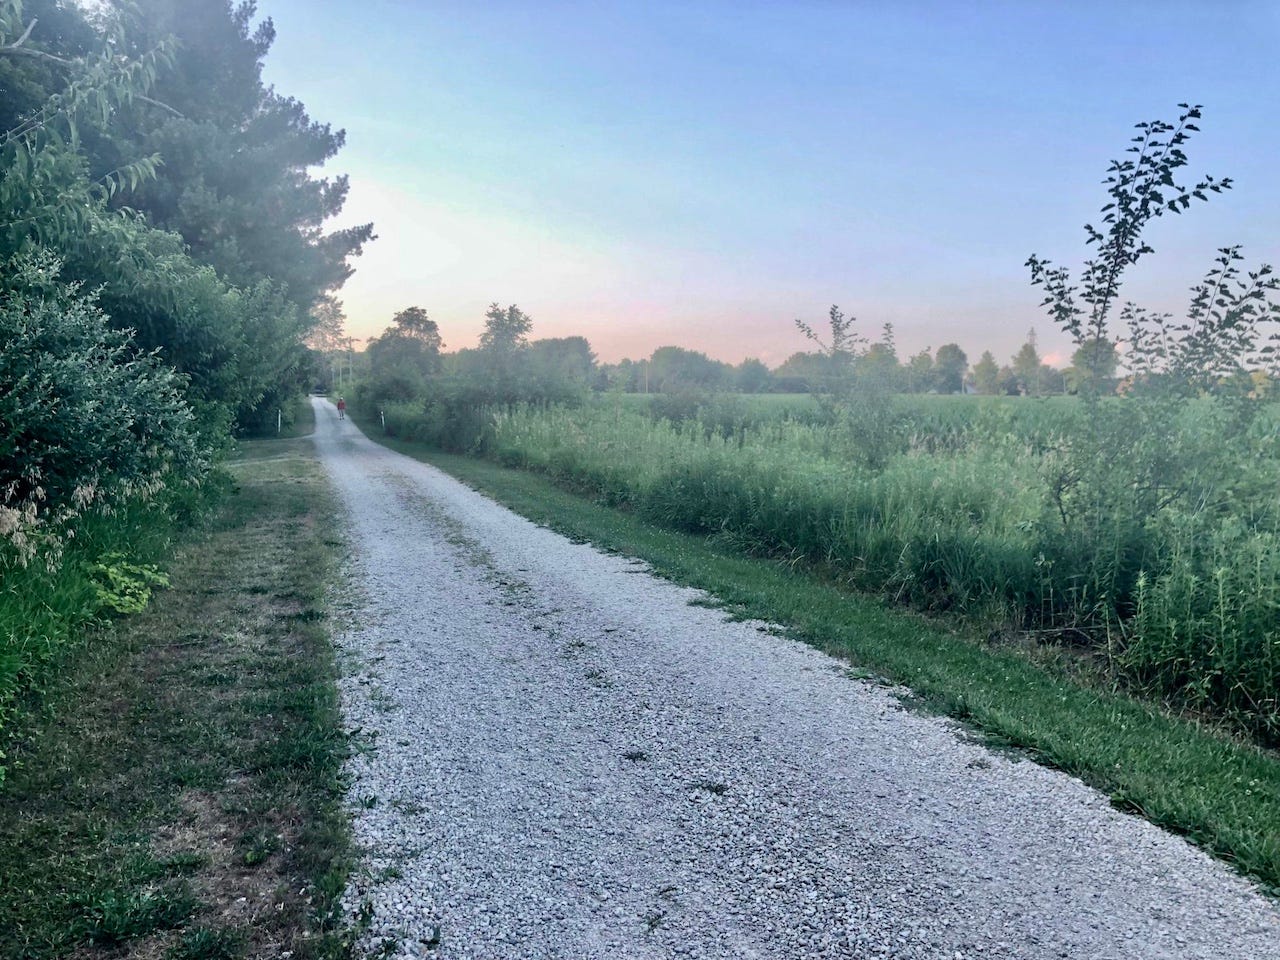 Gravel road leading into a sunset sky, with a meadow on the right side and woods on the left.